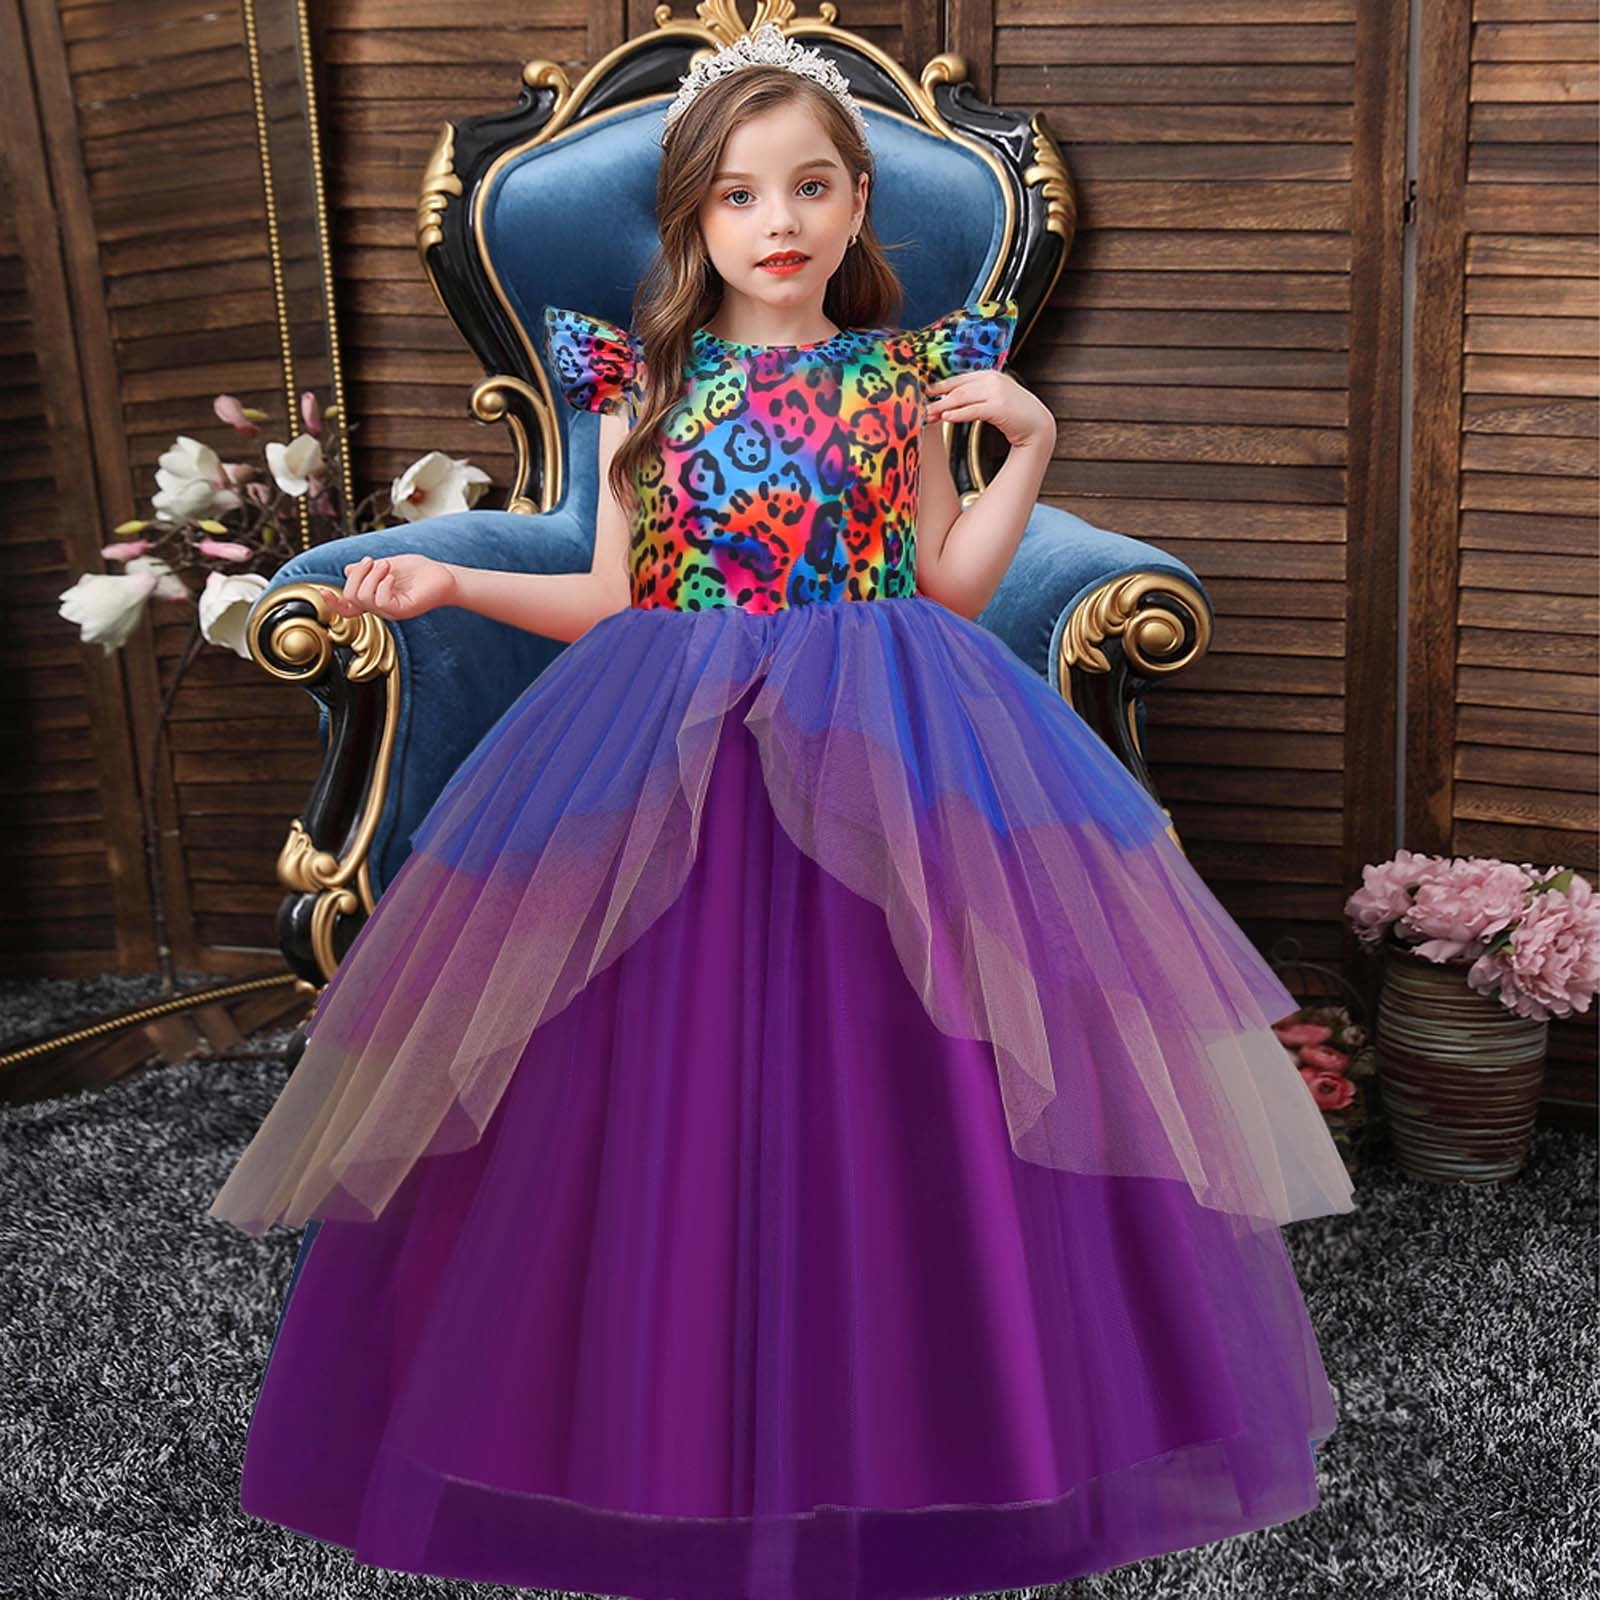 Dadaria Toddler Girl Clothes 4-14 Years Children Baby Girls Middle-aged Children's Long Dress Halloween Cosplay Masquerade Dress Blue 9-10 Years